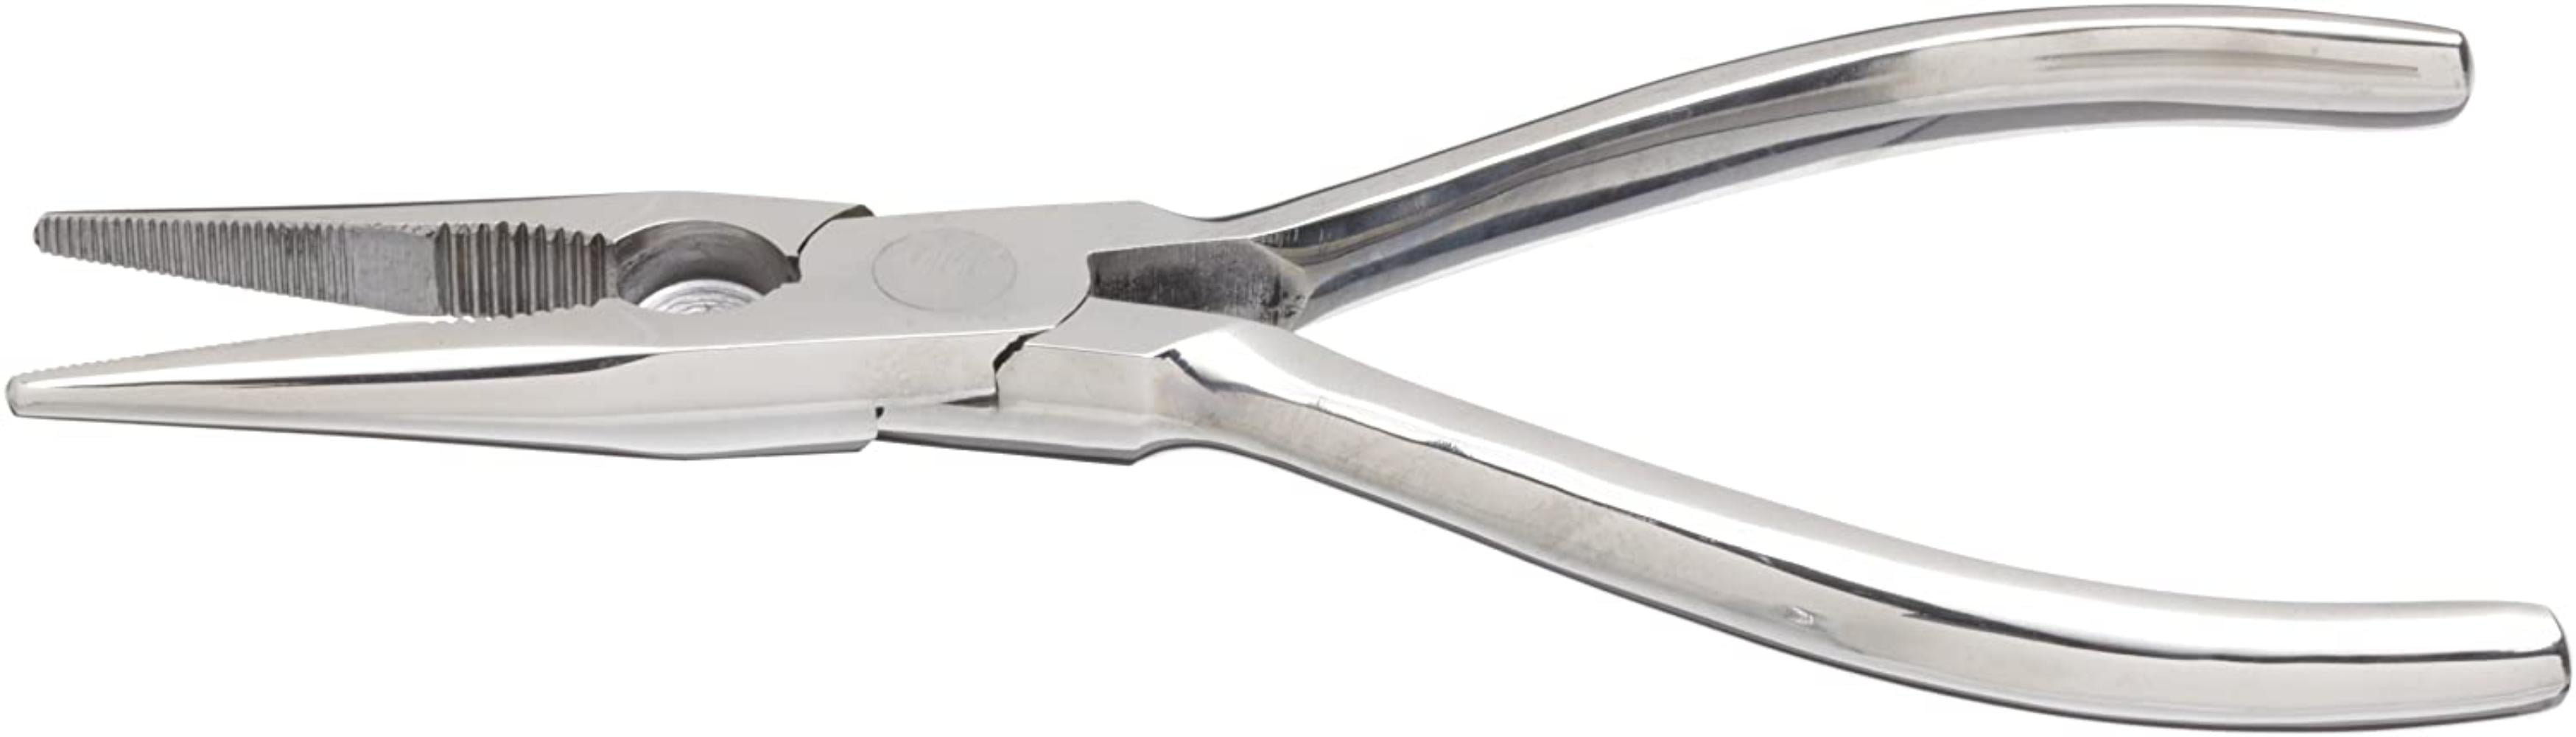 Plastic Grips 8" Aven 10351-P Stainless Steel Combination Pliers